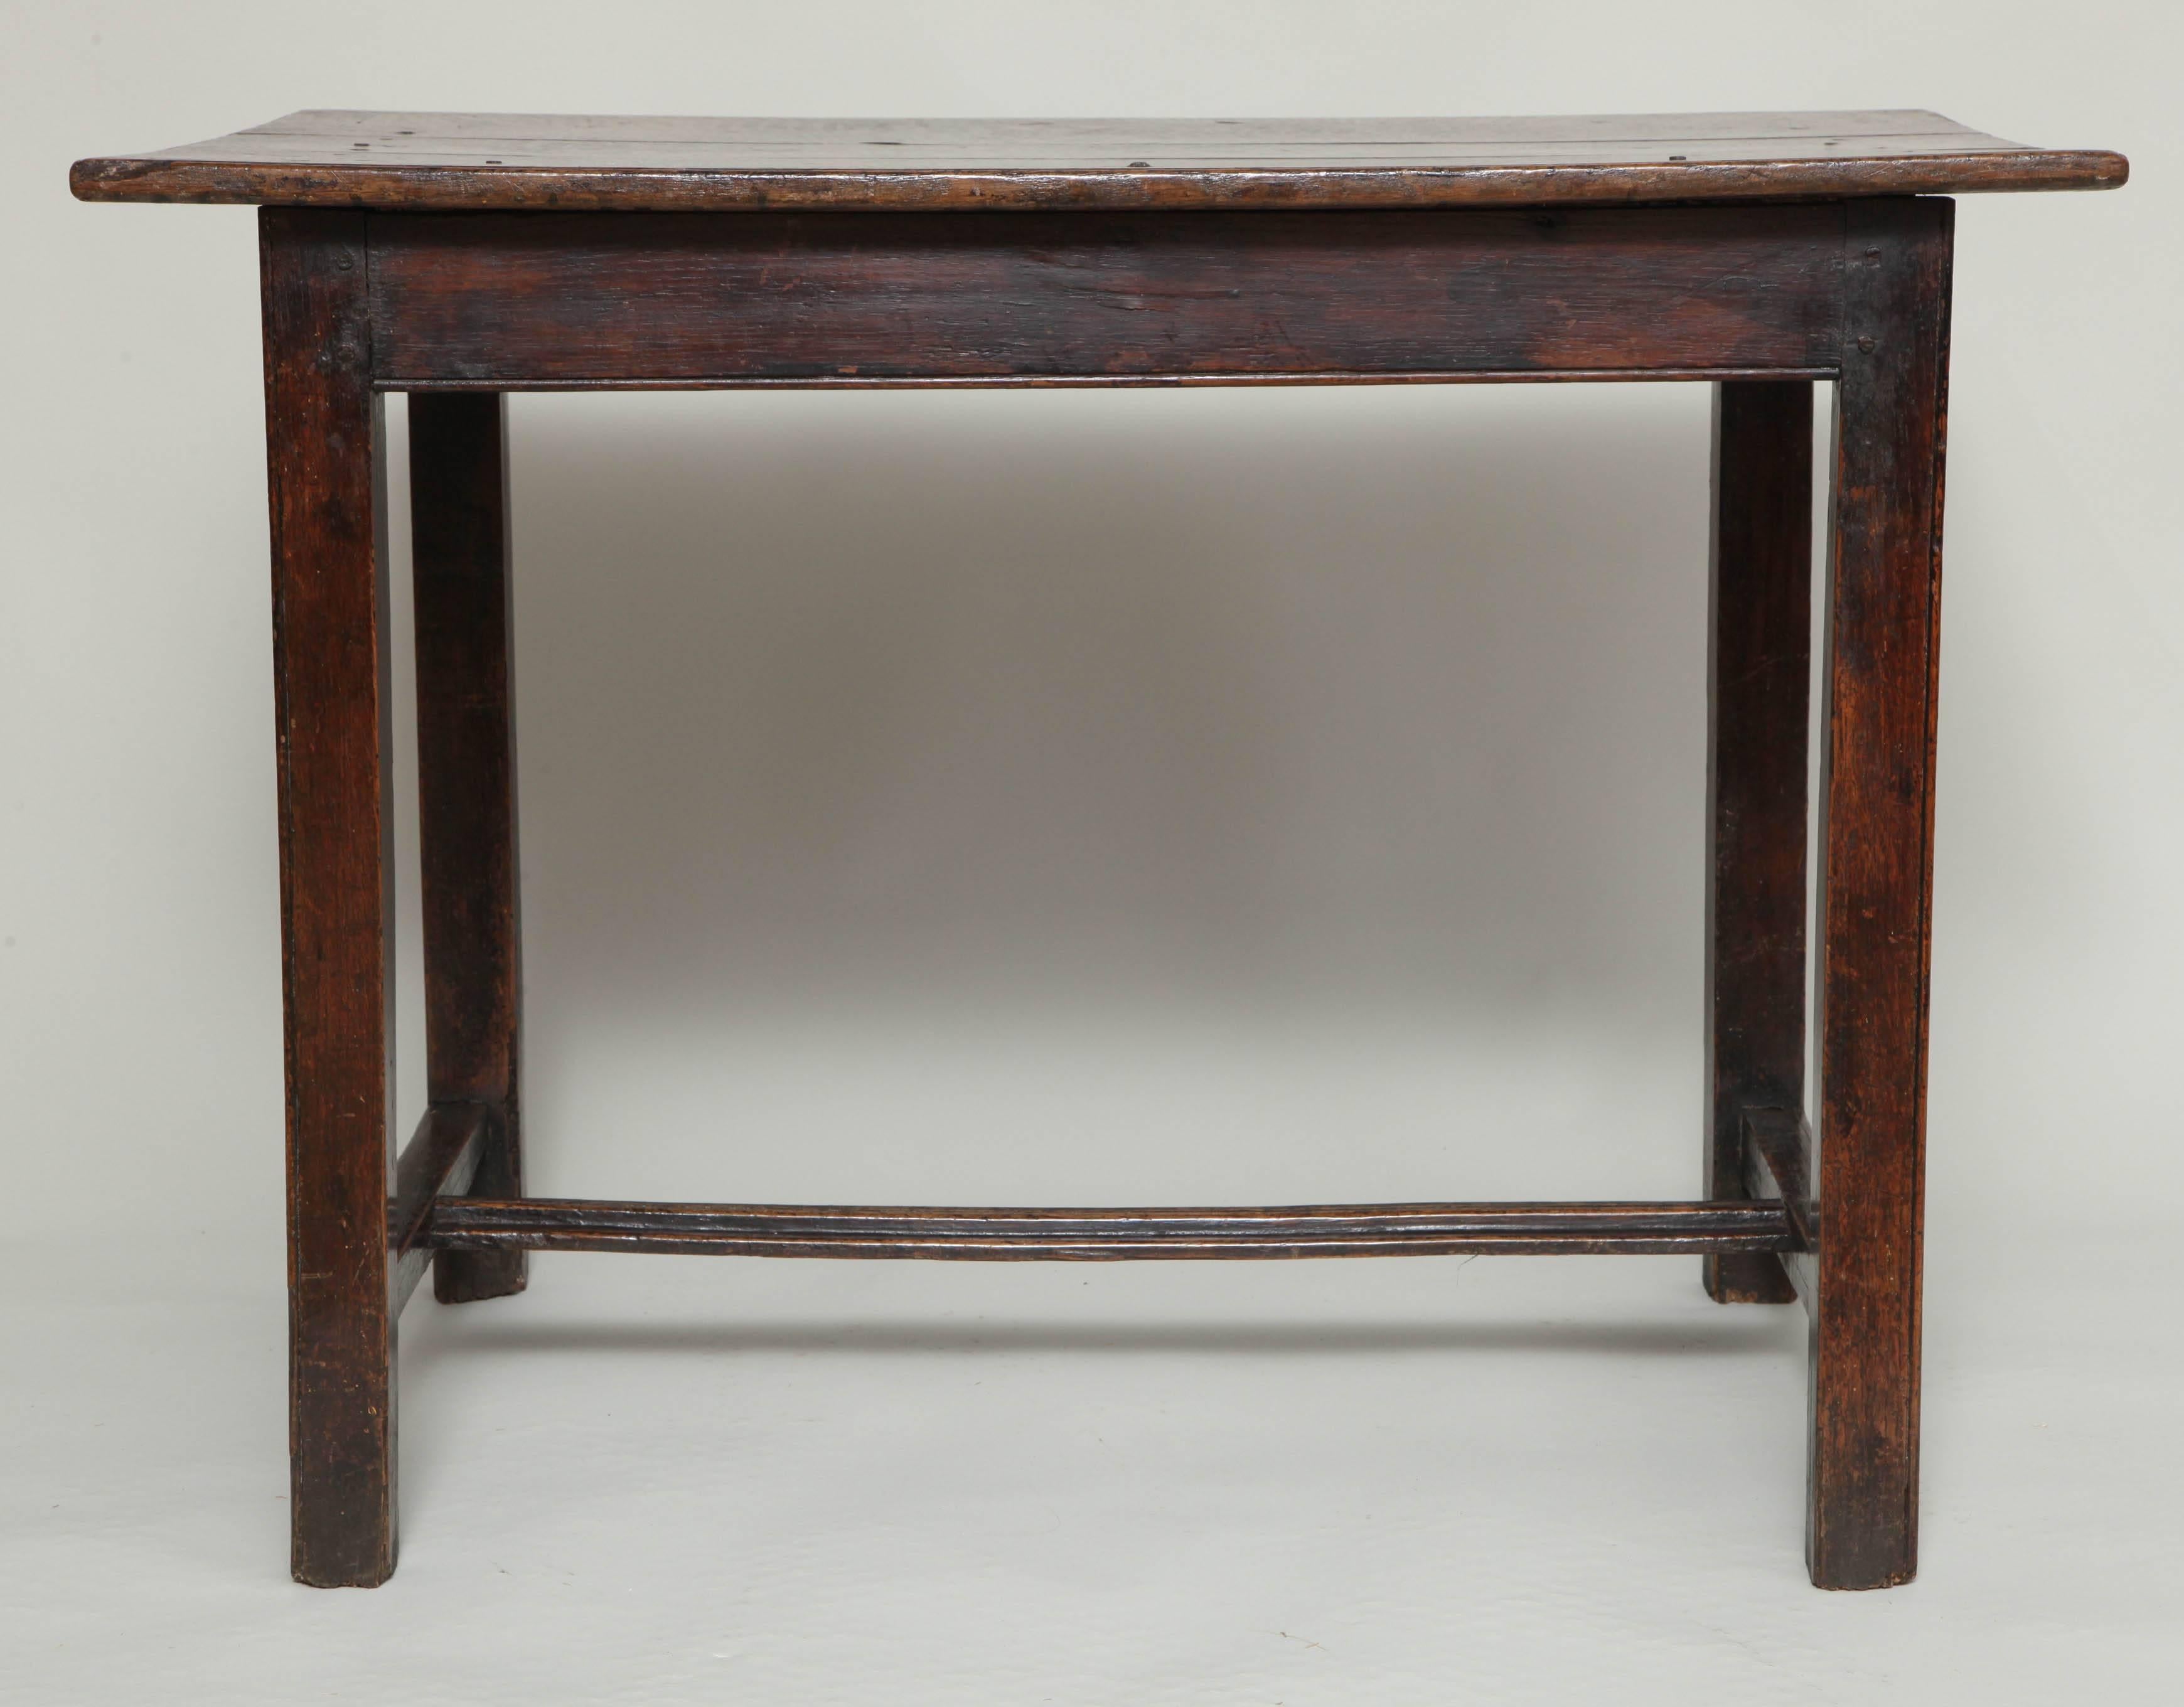 A late 18th century English oak center table having two-piece top over beaded straight legs joined by molded H-stretcher. Good mottled color.